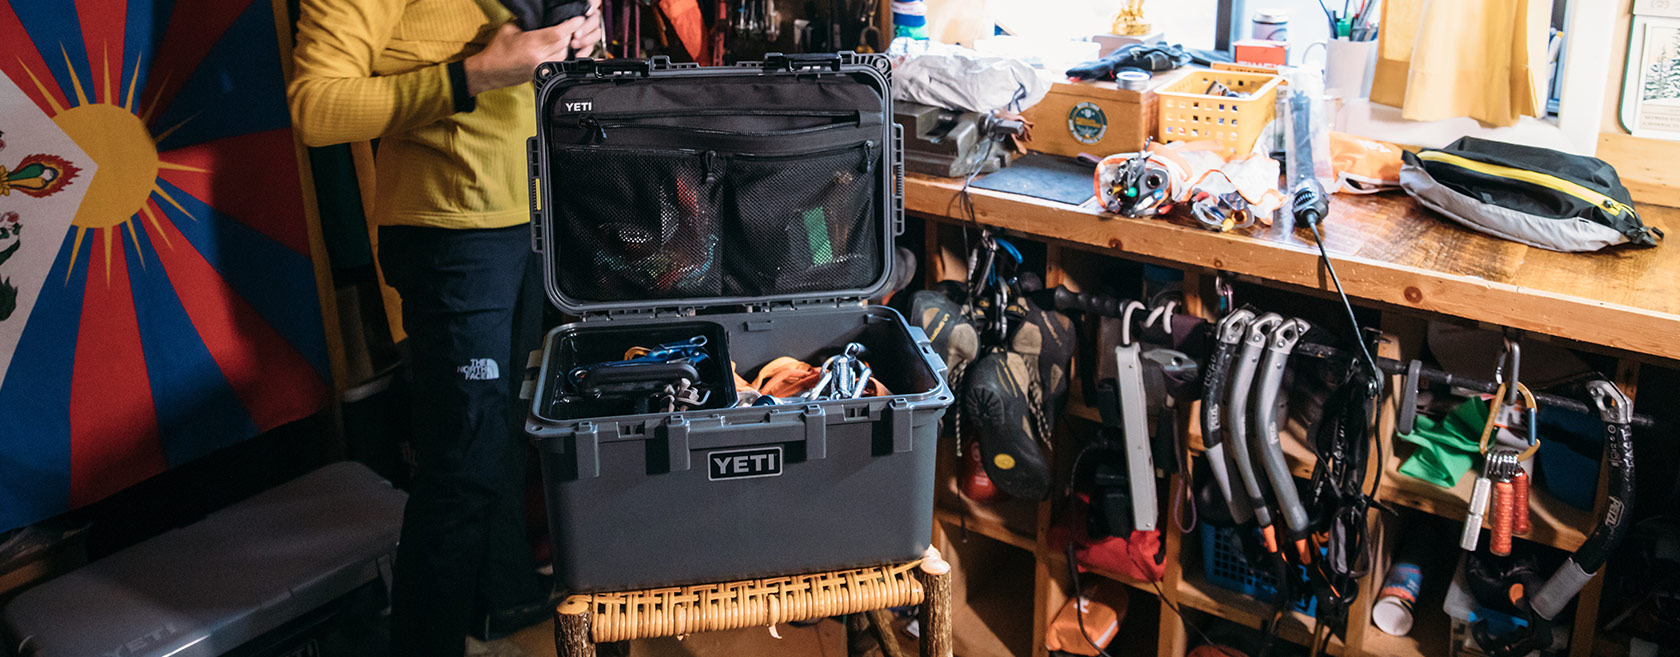 The Yeti Loadout GoBox 30 is versatile, robust and durable